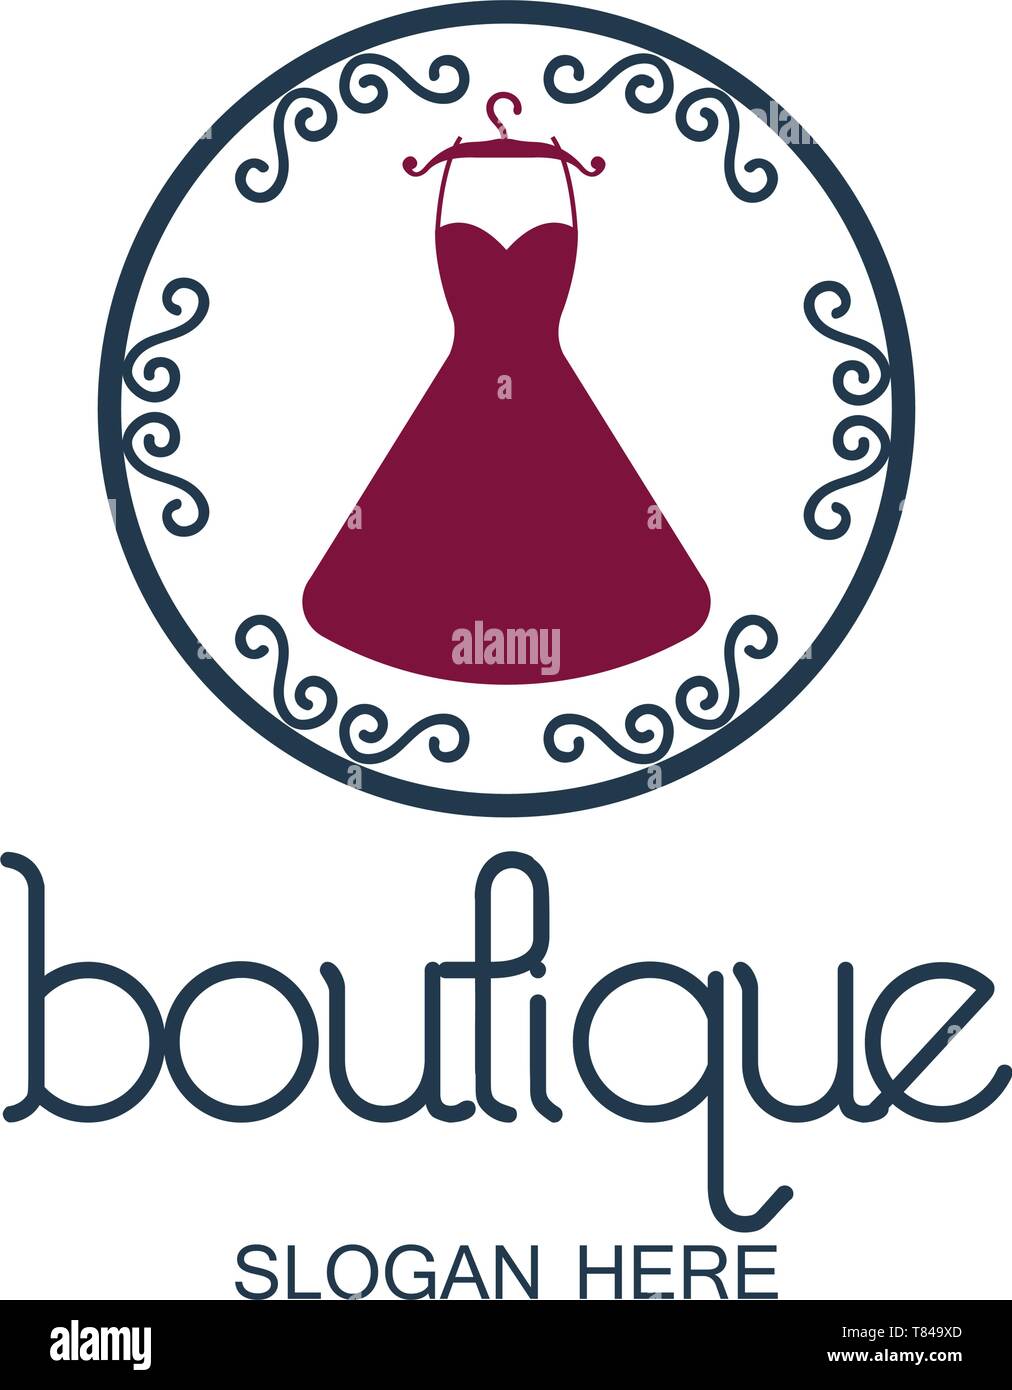 boutique logo with text space for your slogan tagline, vector ...